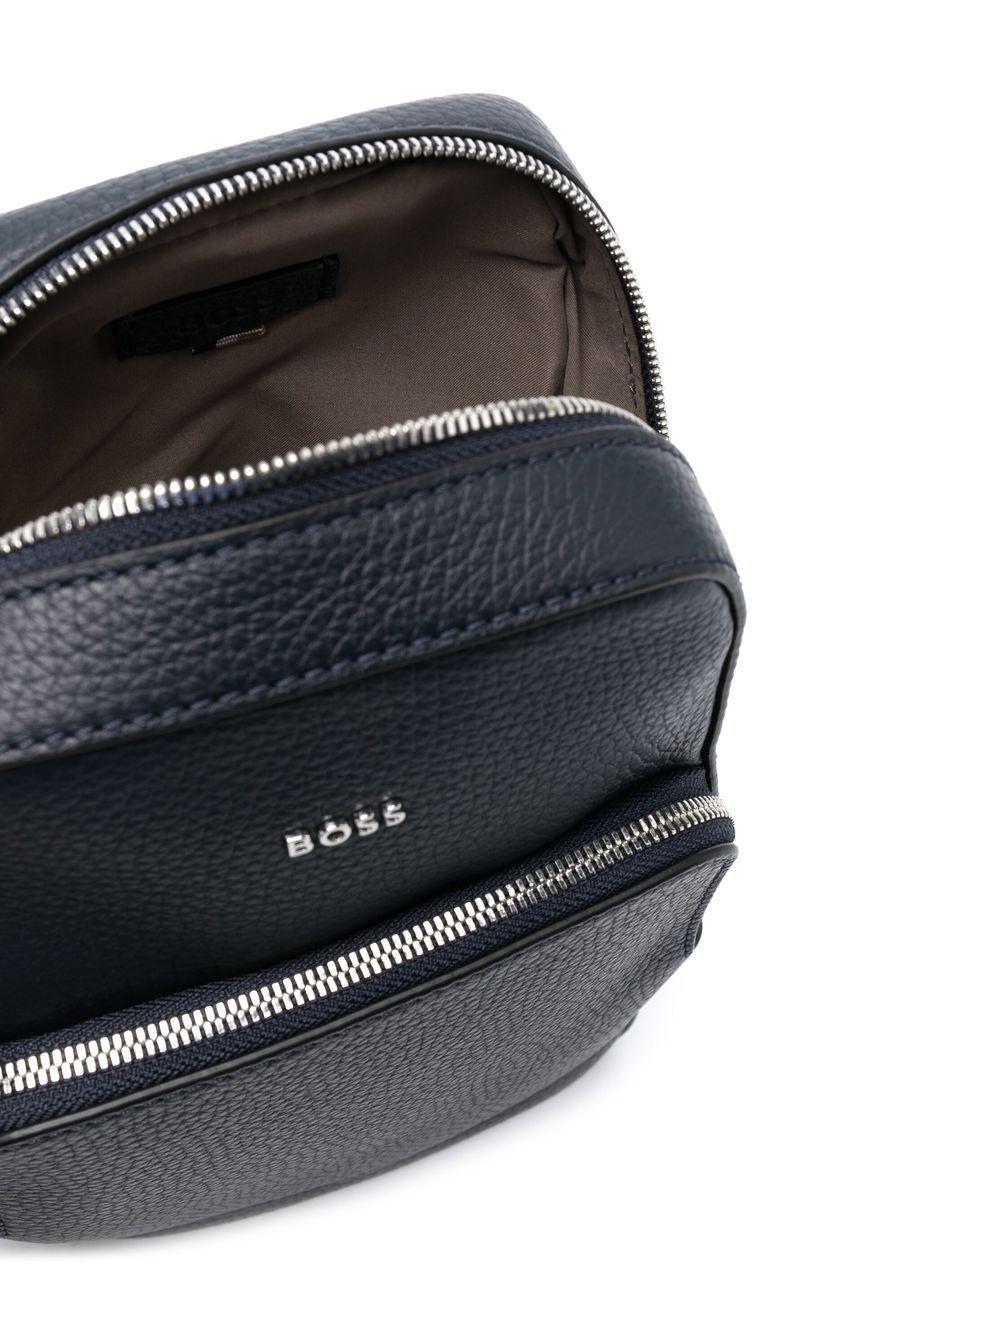 BOSS by HUGO BOSS Mono-strap Leather Backpack in Blue for Men | Lyst